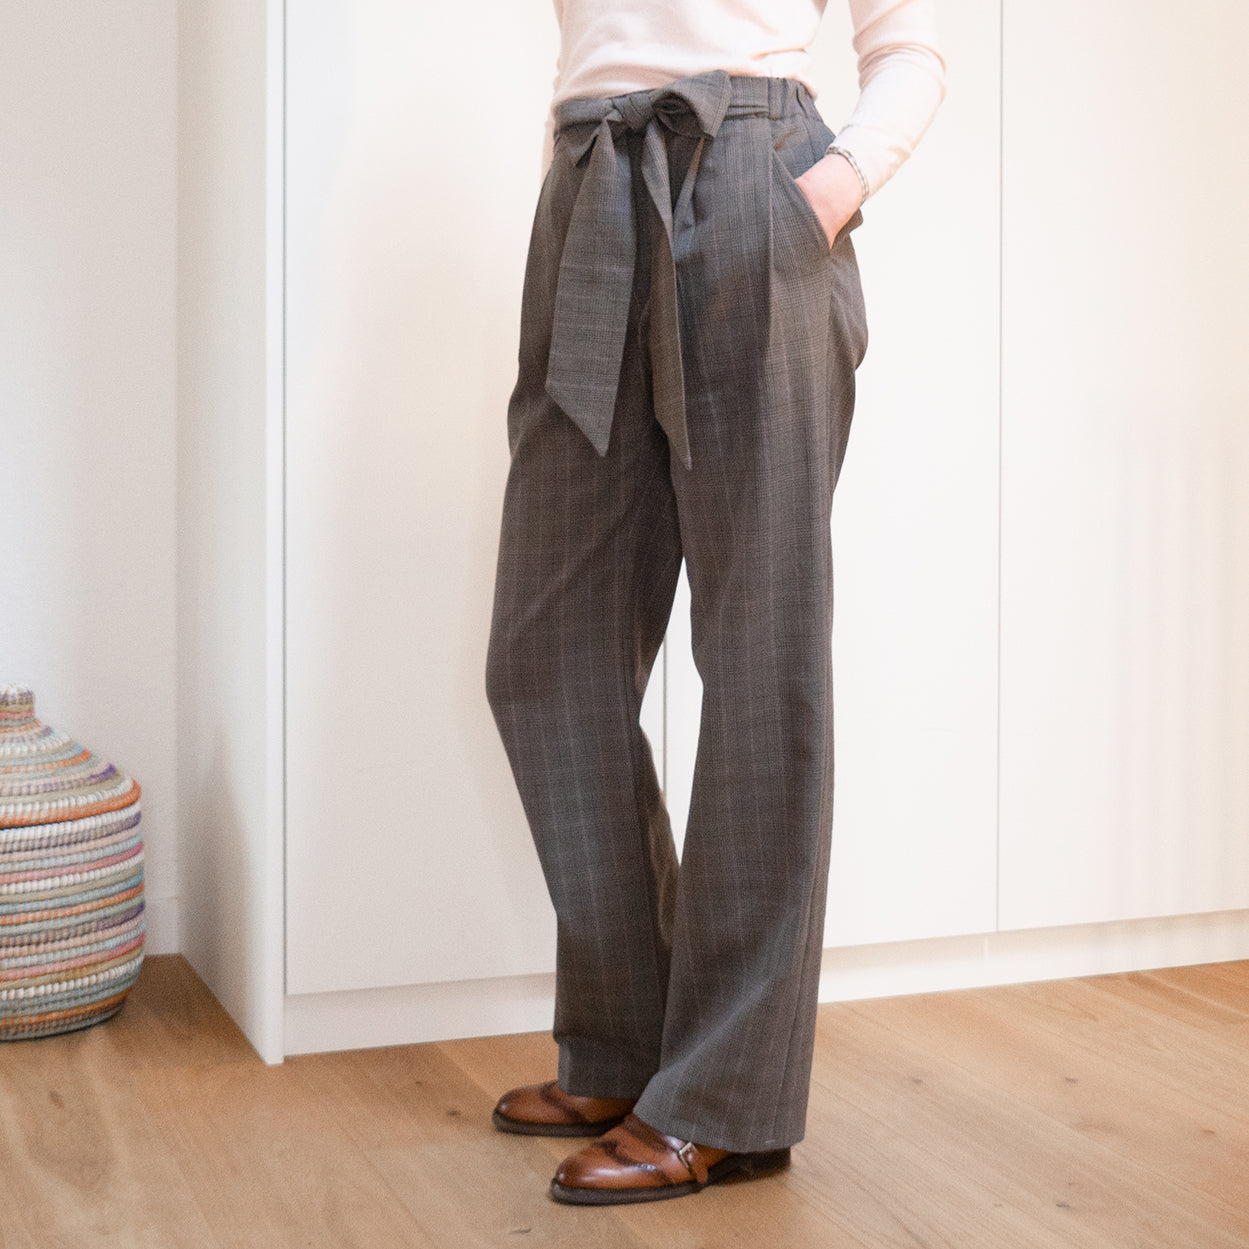 Toni Trousers 34 - 44 sewing pattern and instructions